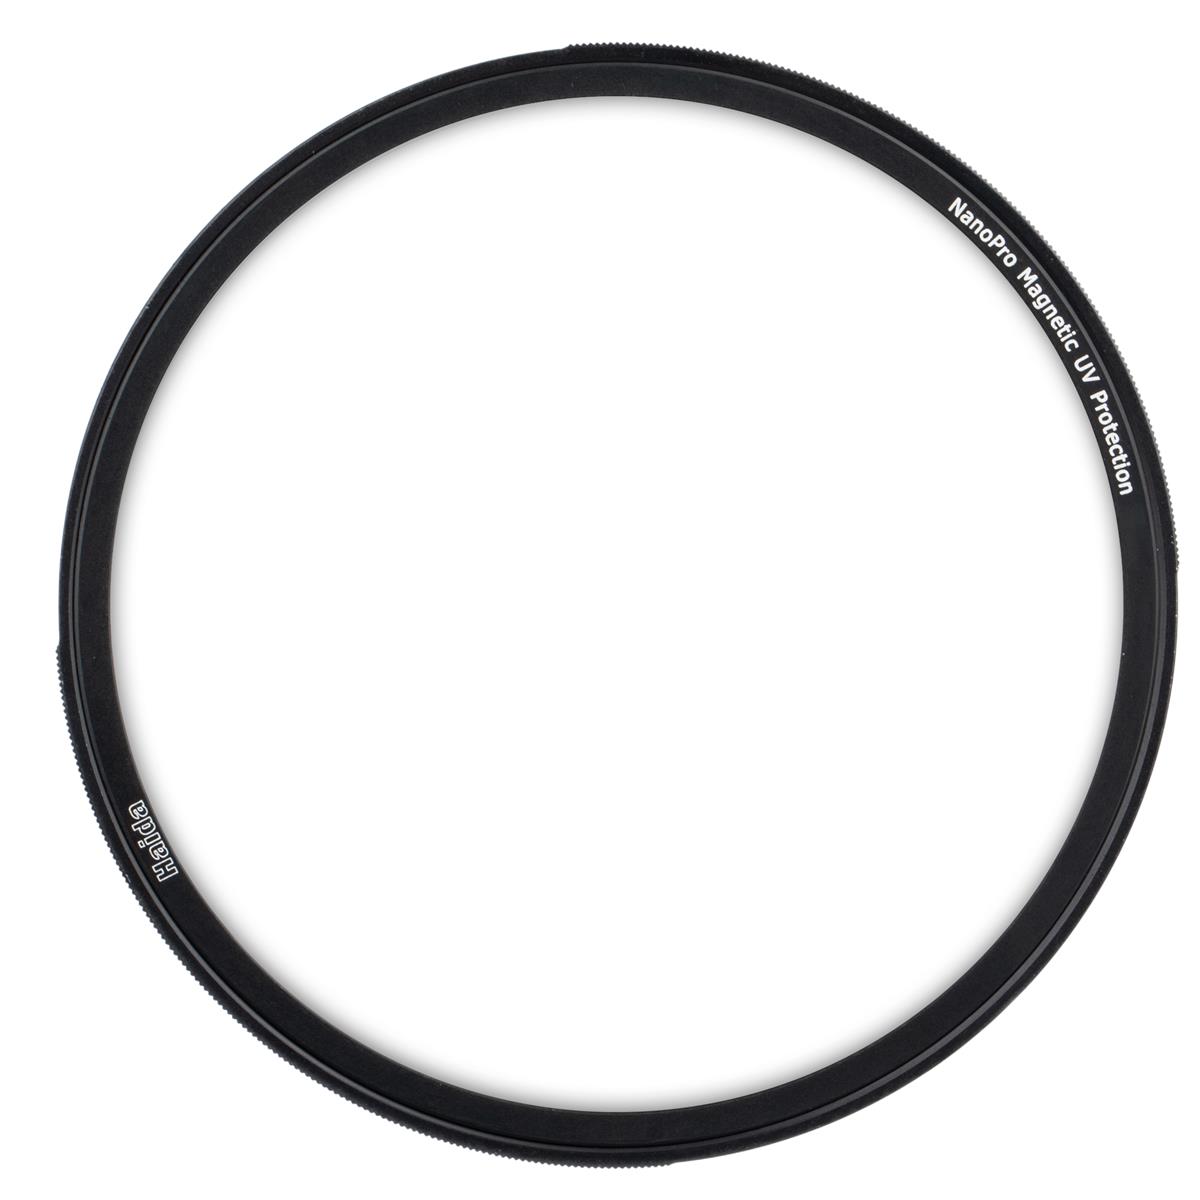 kase 77mm 82mm magnetic adapter ring convert thread filter to magnetic filter Haida 67mm Haida NanoPro Magnetic UV Protection Filter with Adapter Ring